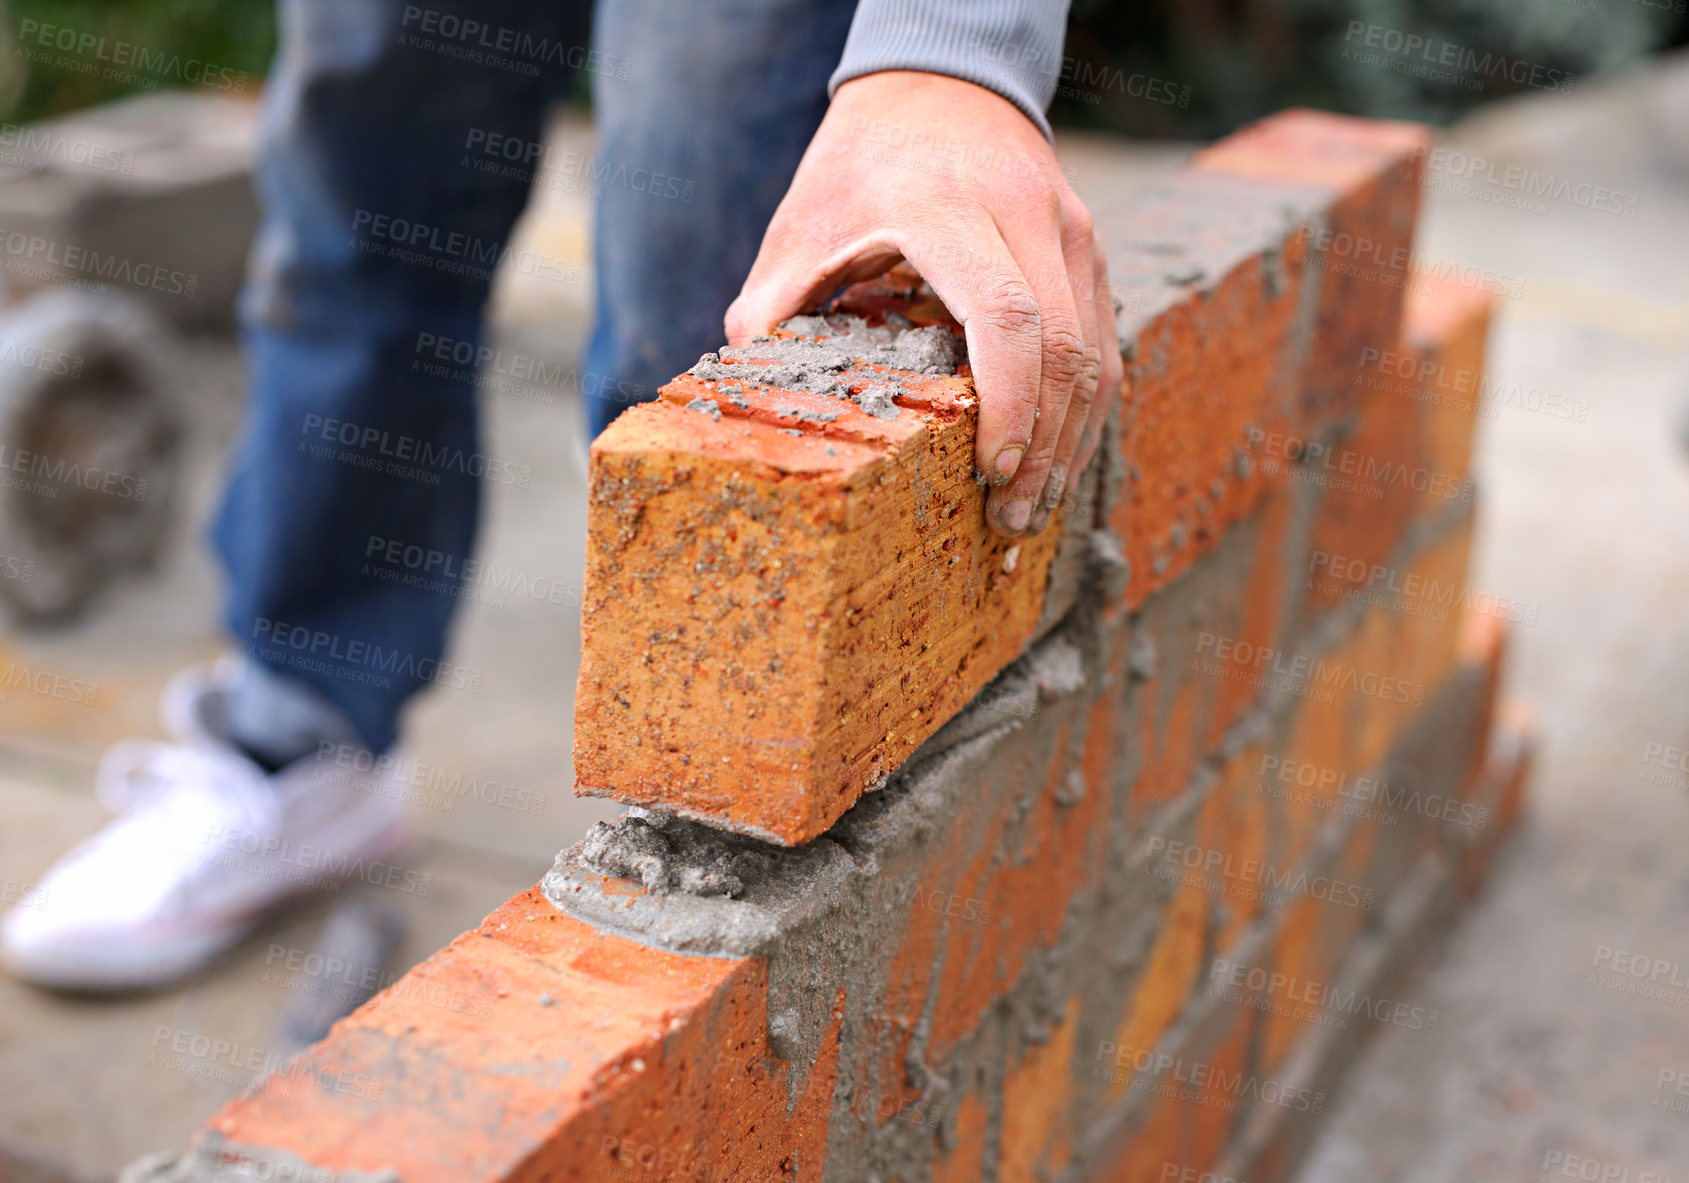 Buy stock photo Bricklayer, hand and construction with man builder on roof, working employee in industrial industry and contractor career. Outdoor, cement on site with handyman staff, skilled masonry with bricks